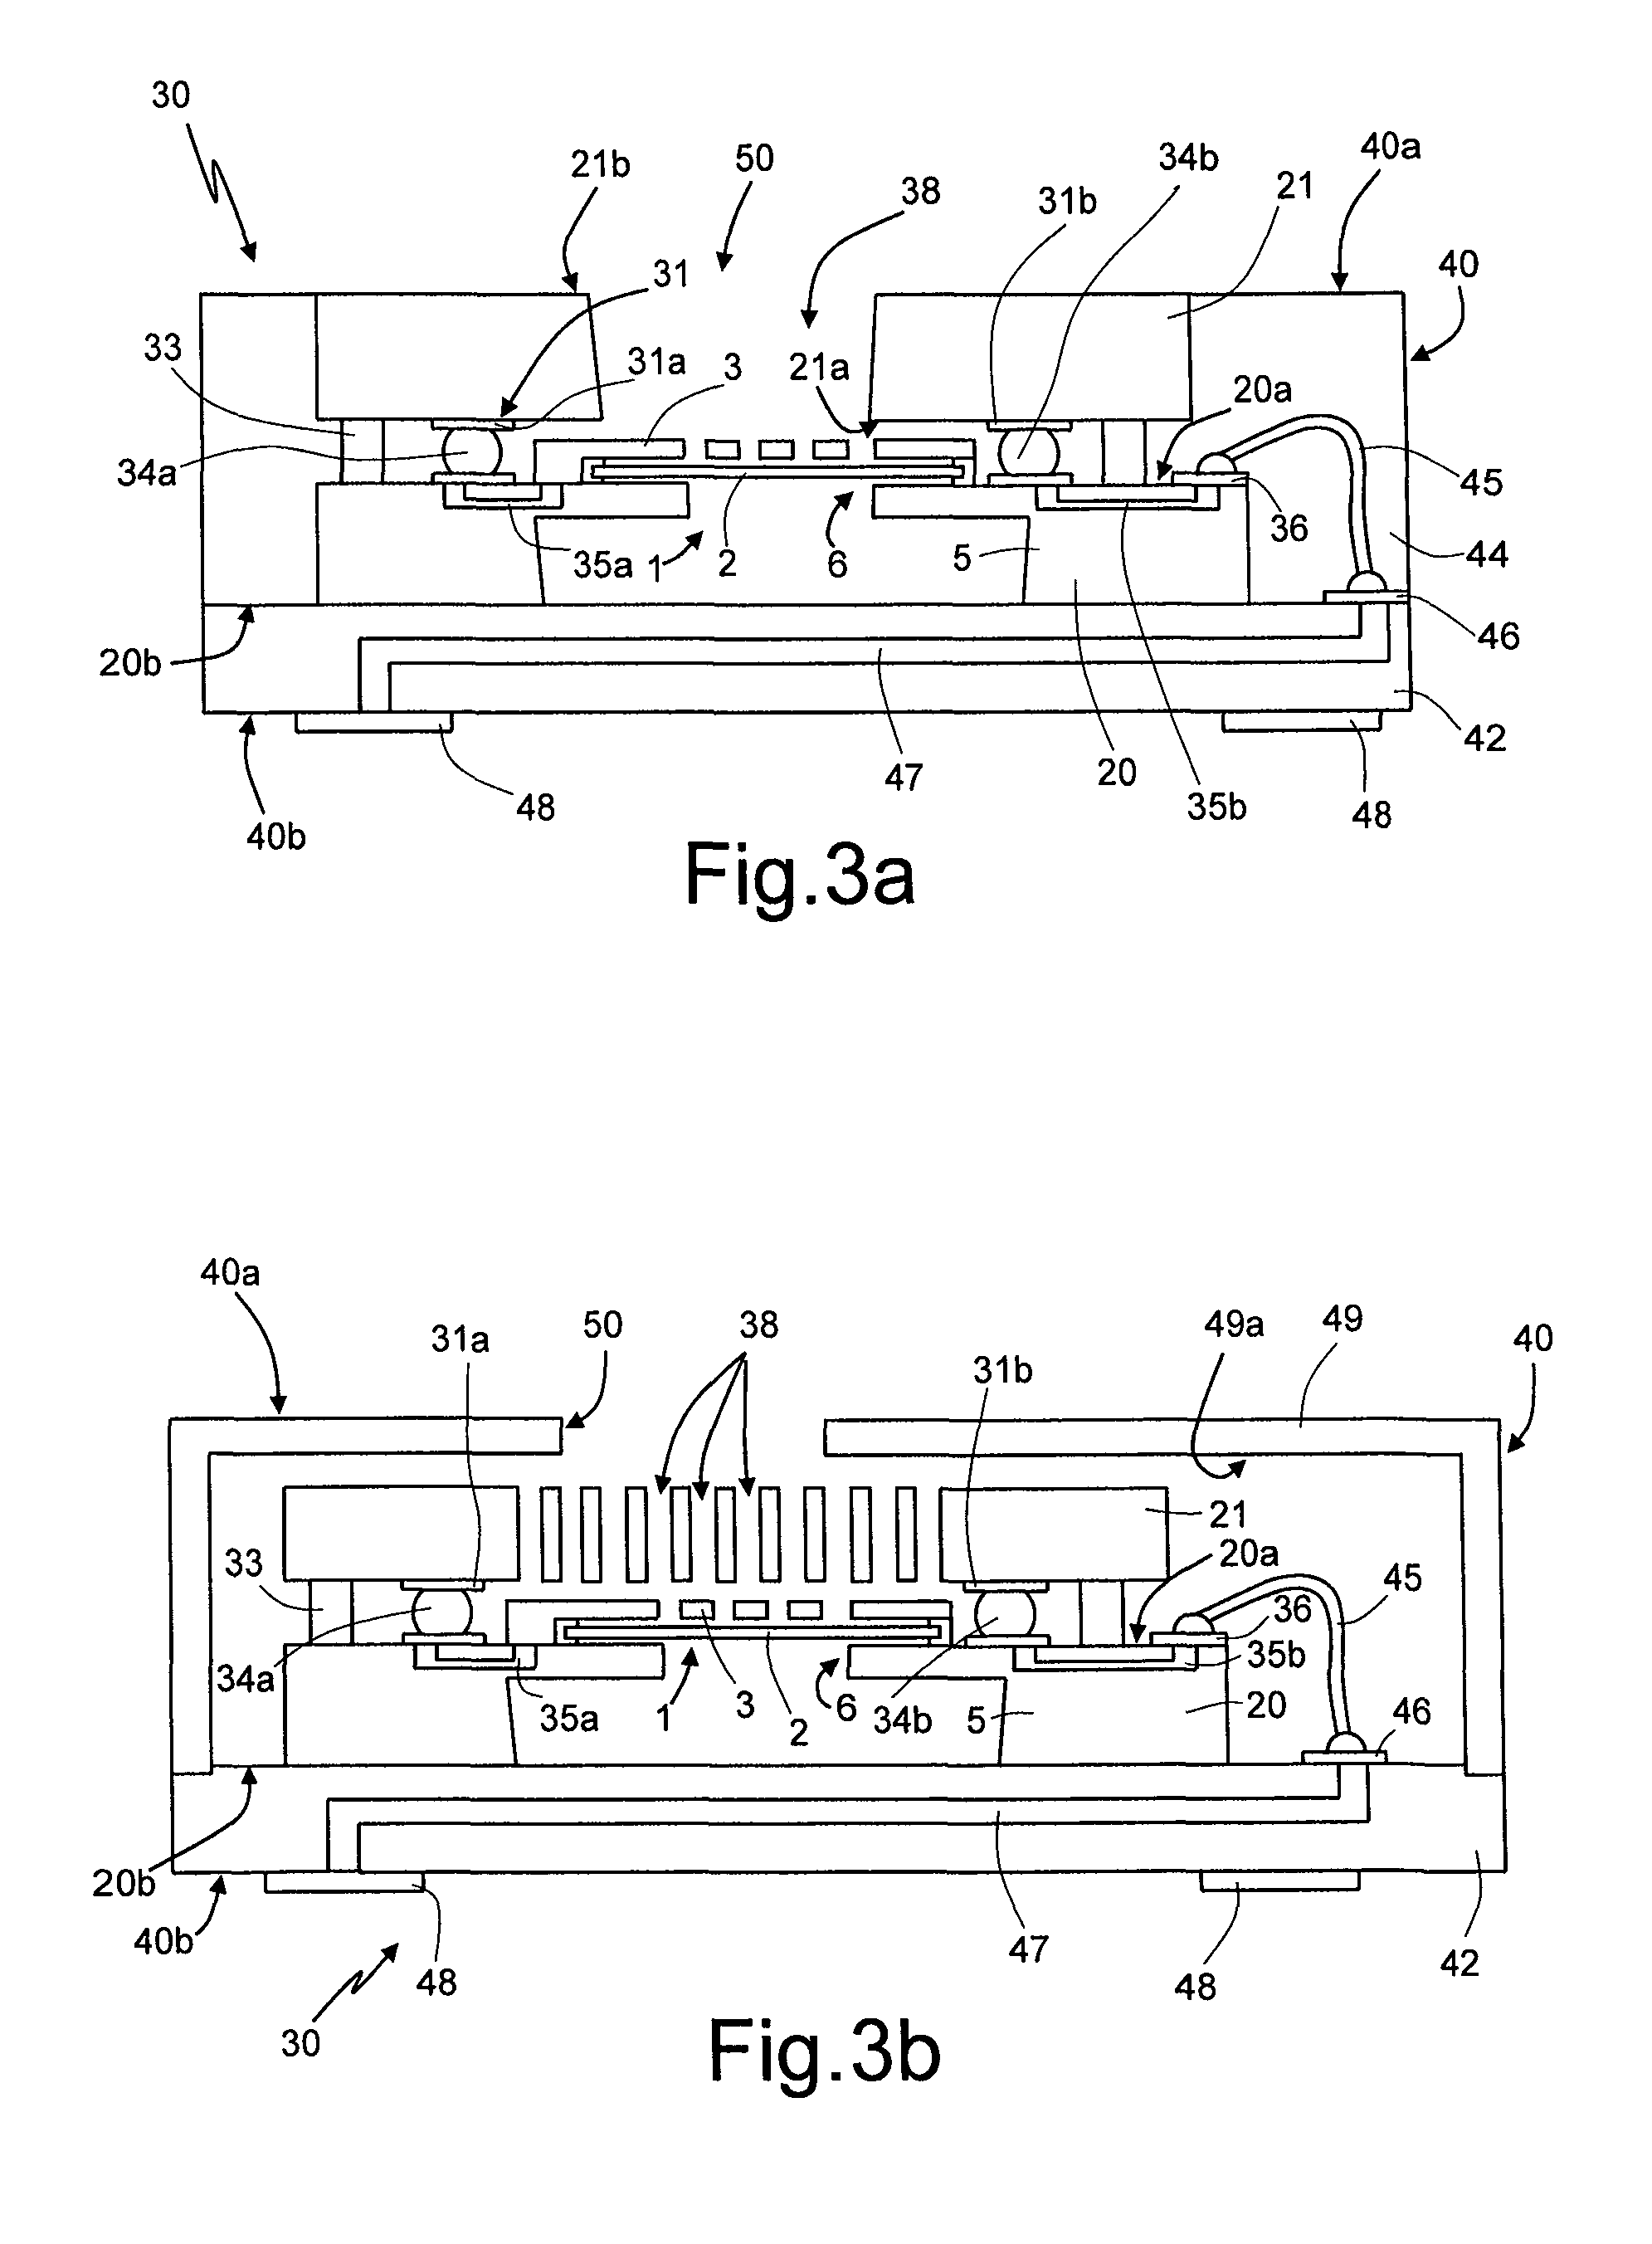 Assembly of a capacitive acoustic transducer of the microelectromechanical type and package thereof